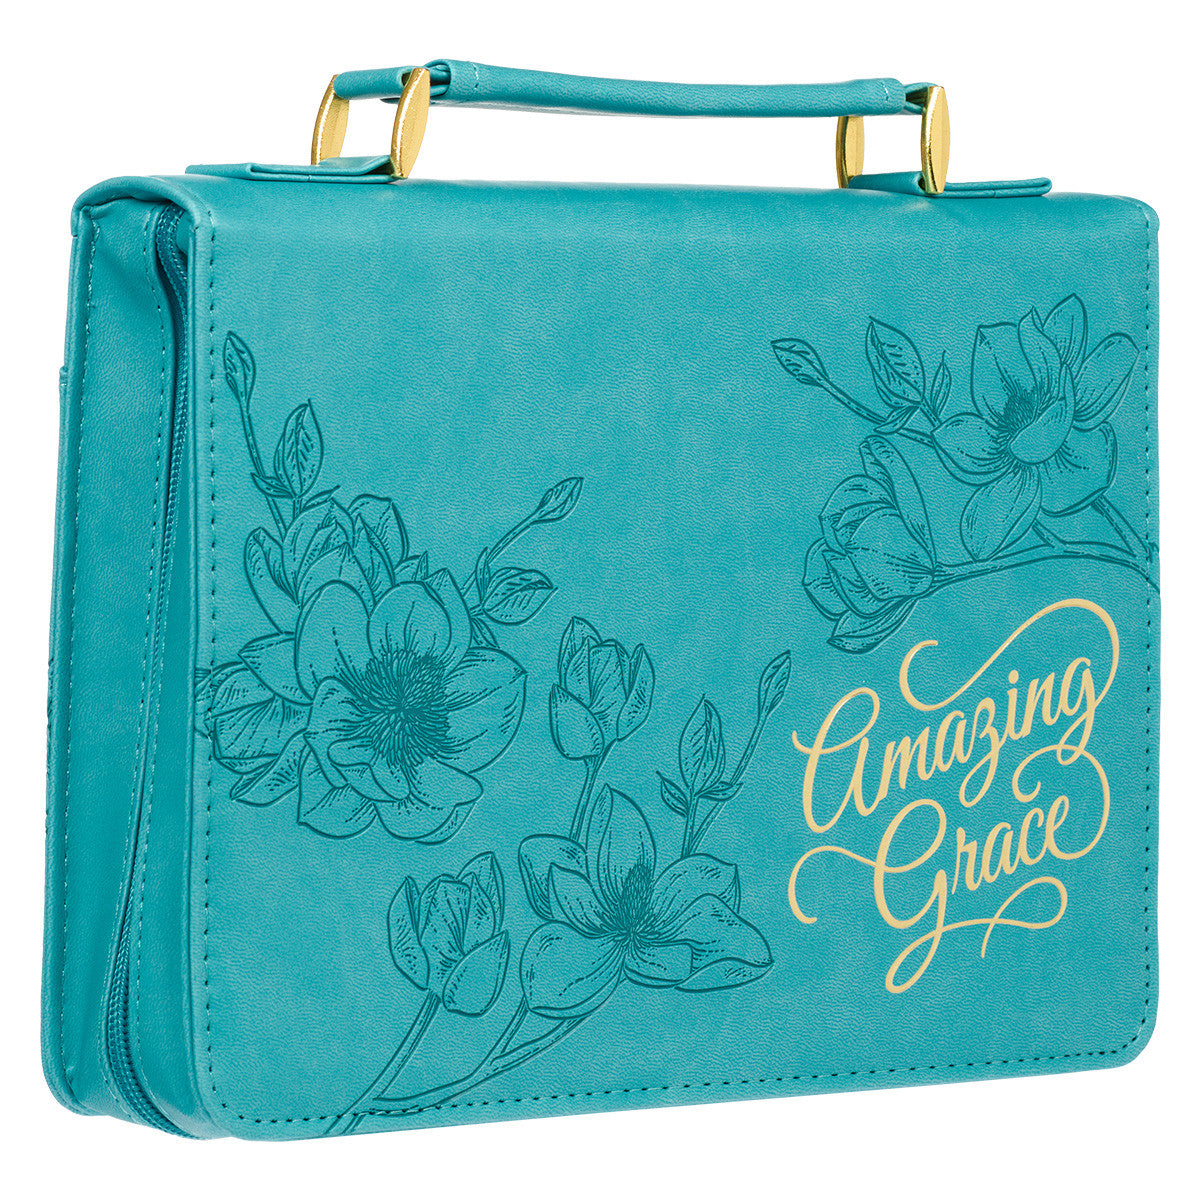 Amazing Grace Floral Teal Faux Leather Fashion Bible Cover